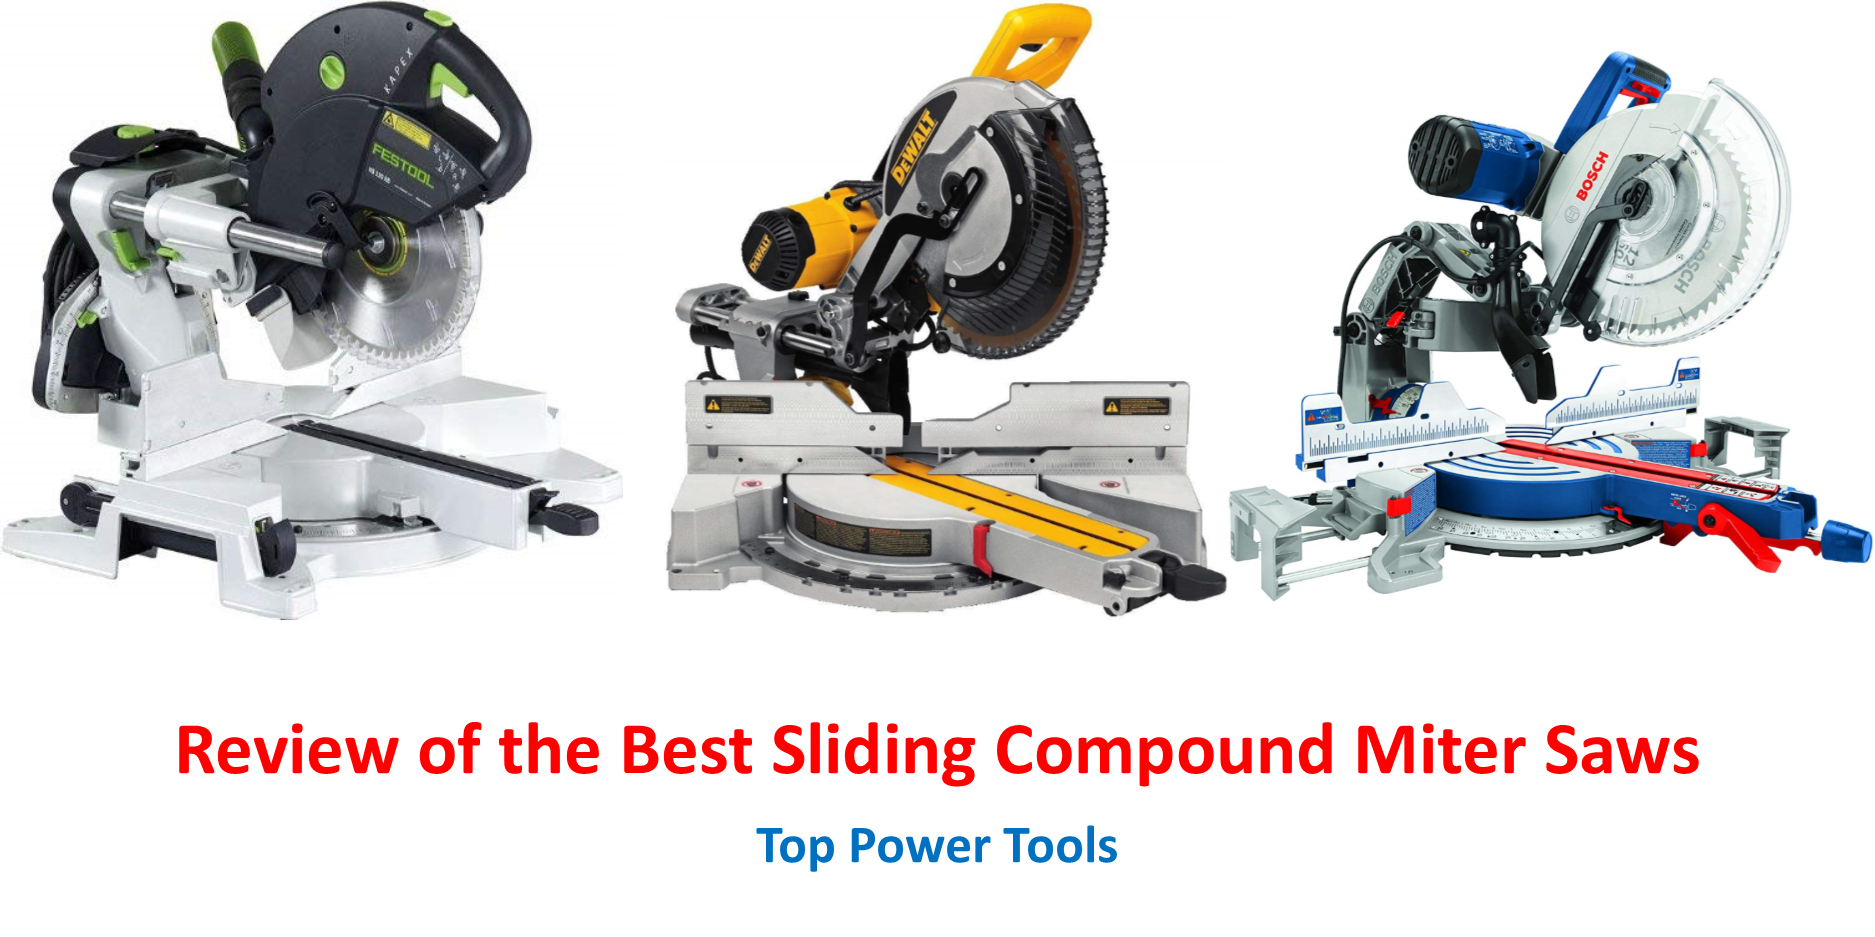 A review of the best sliding compound miter saws